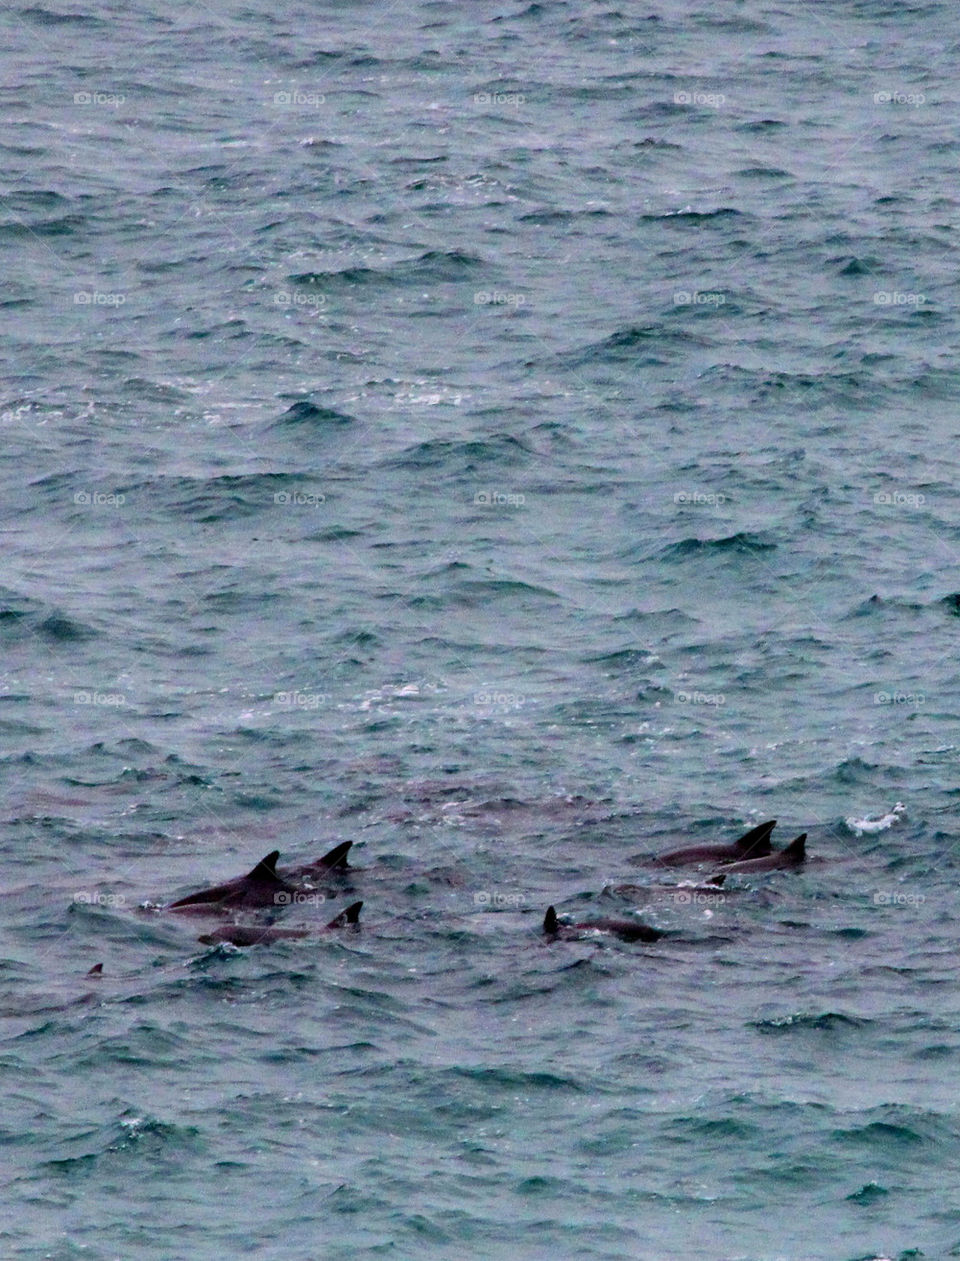 A pod of wild dolphins